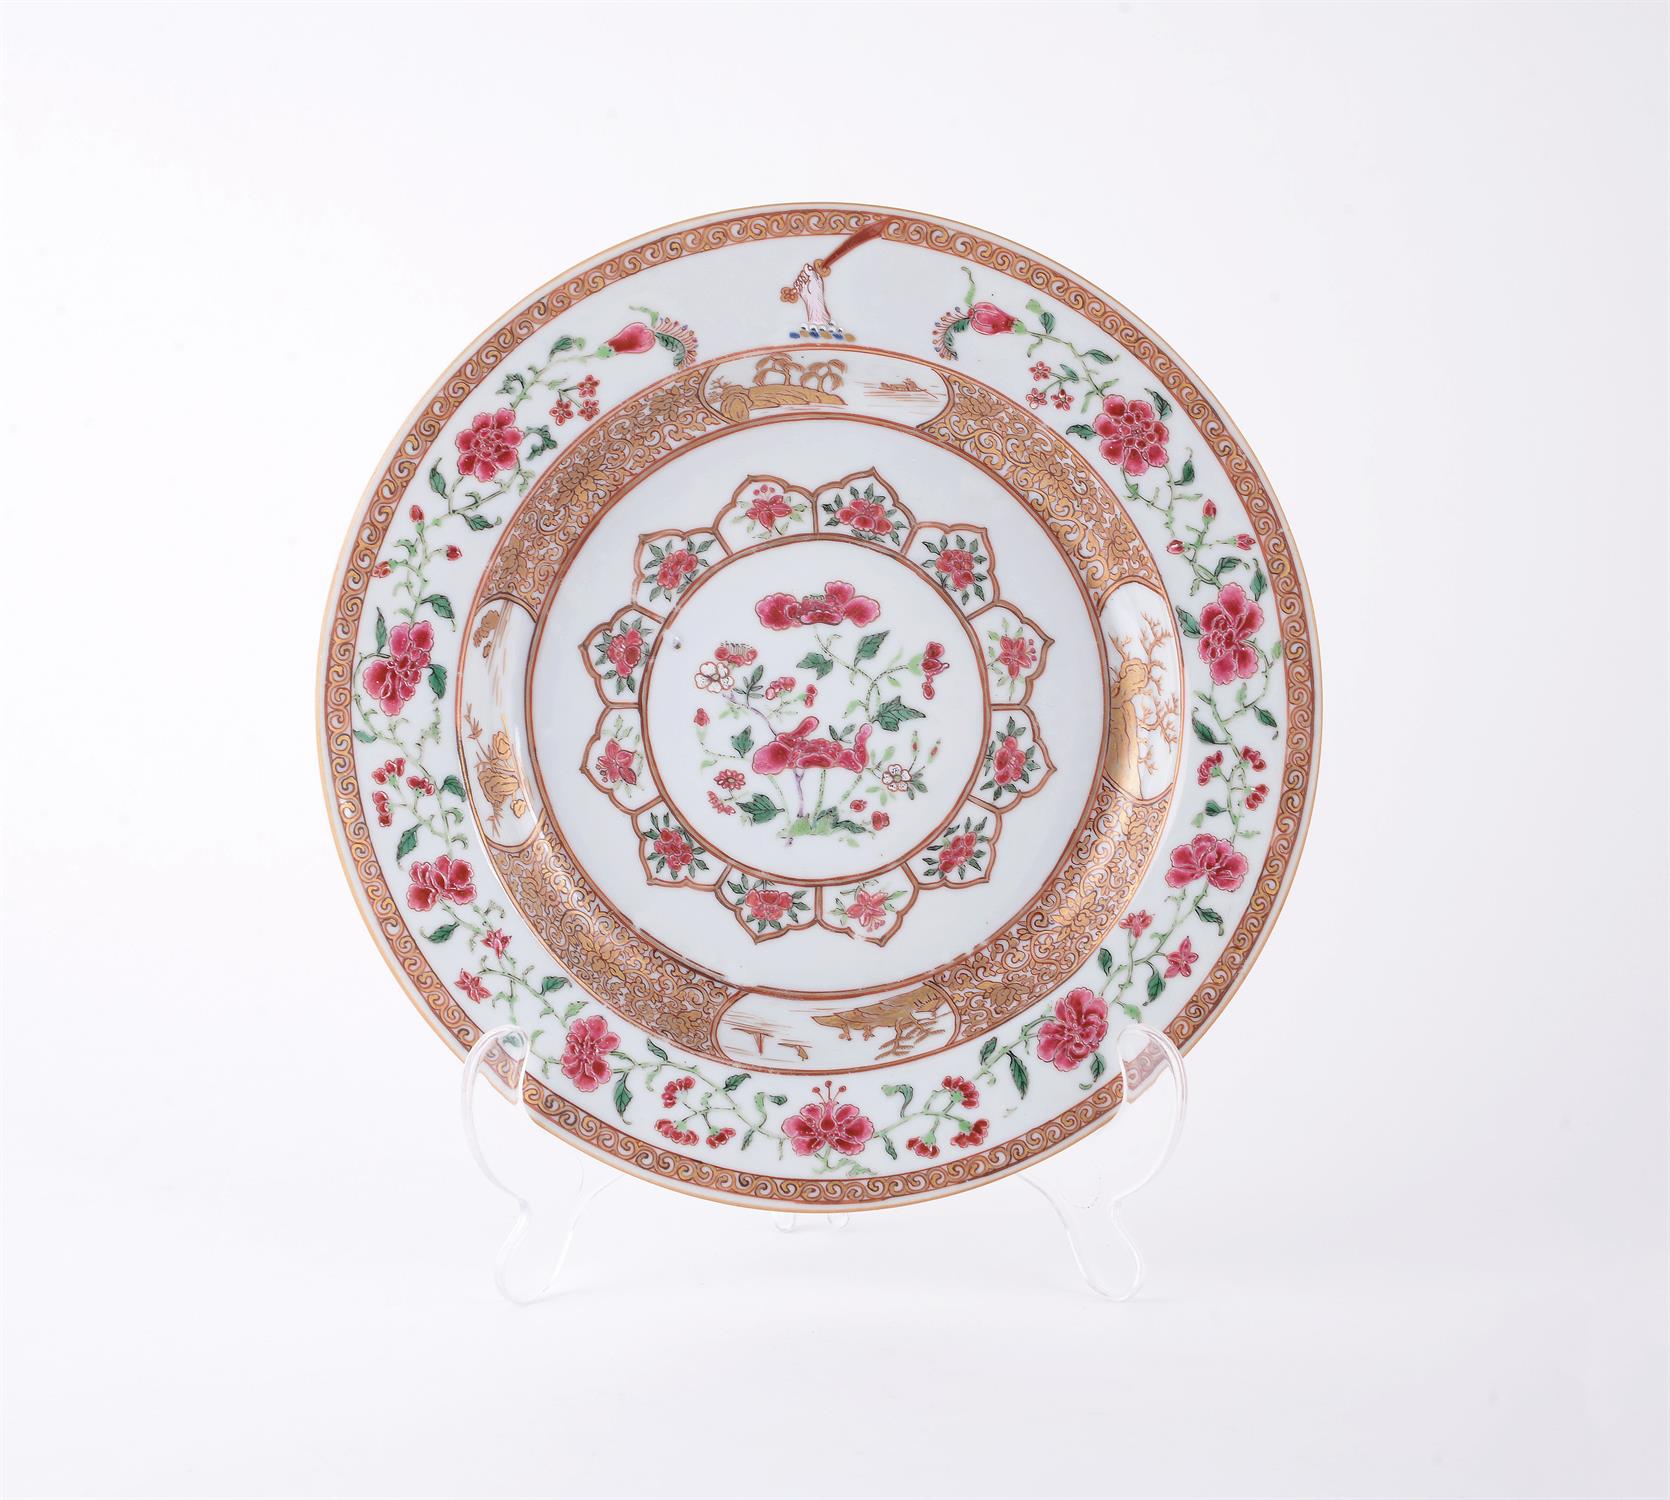 A Chinese 'Famille Rose' crested plate